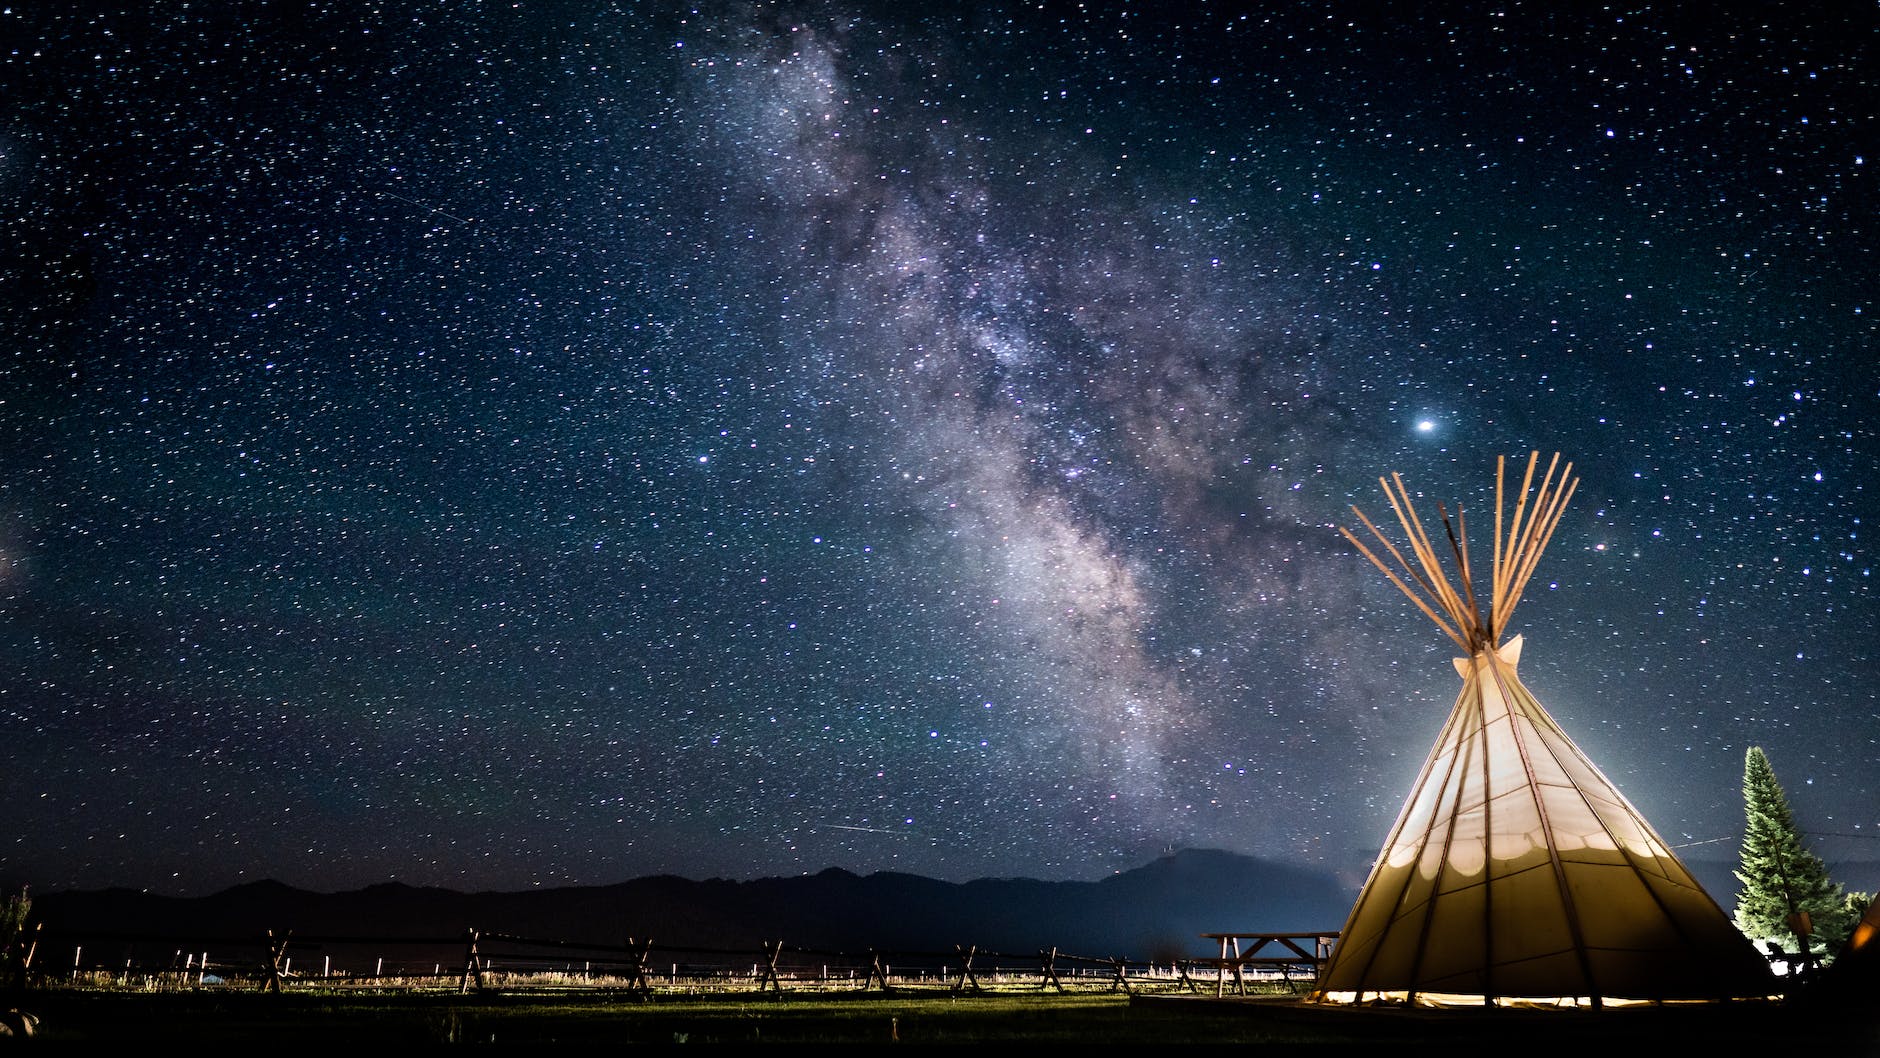 photo of teepee under a starry sky